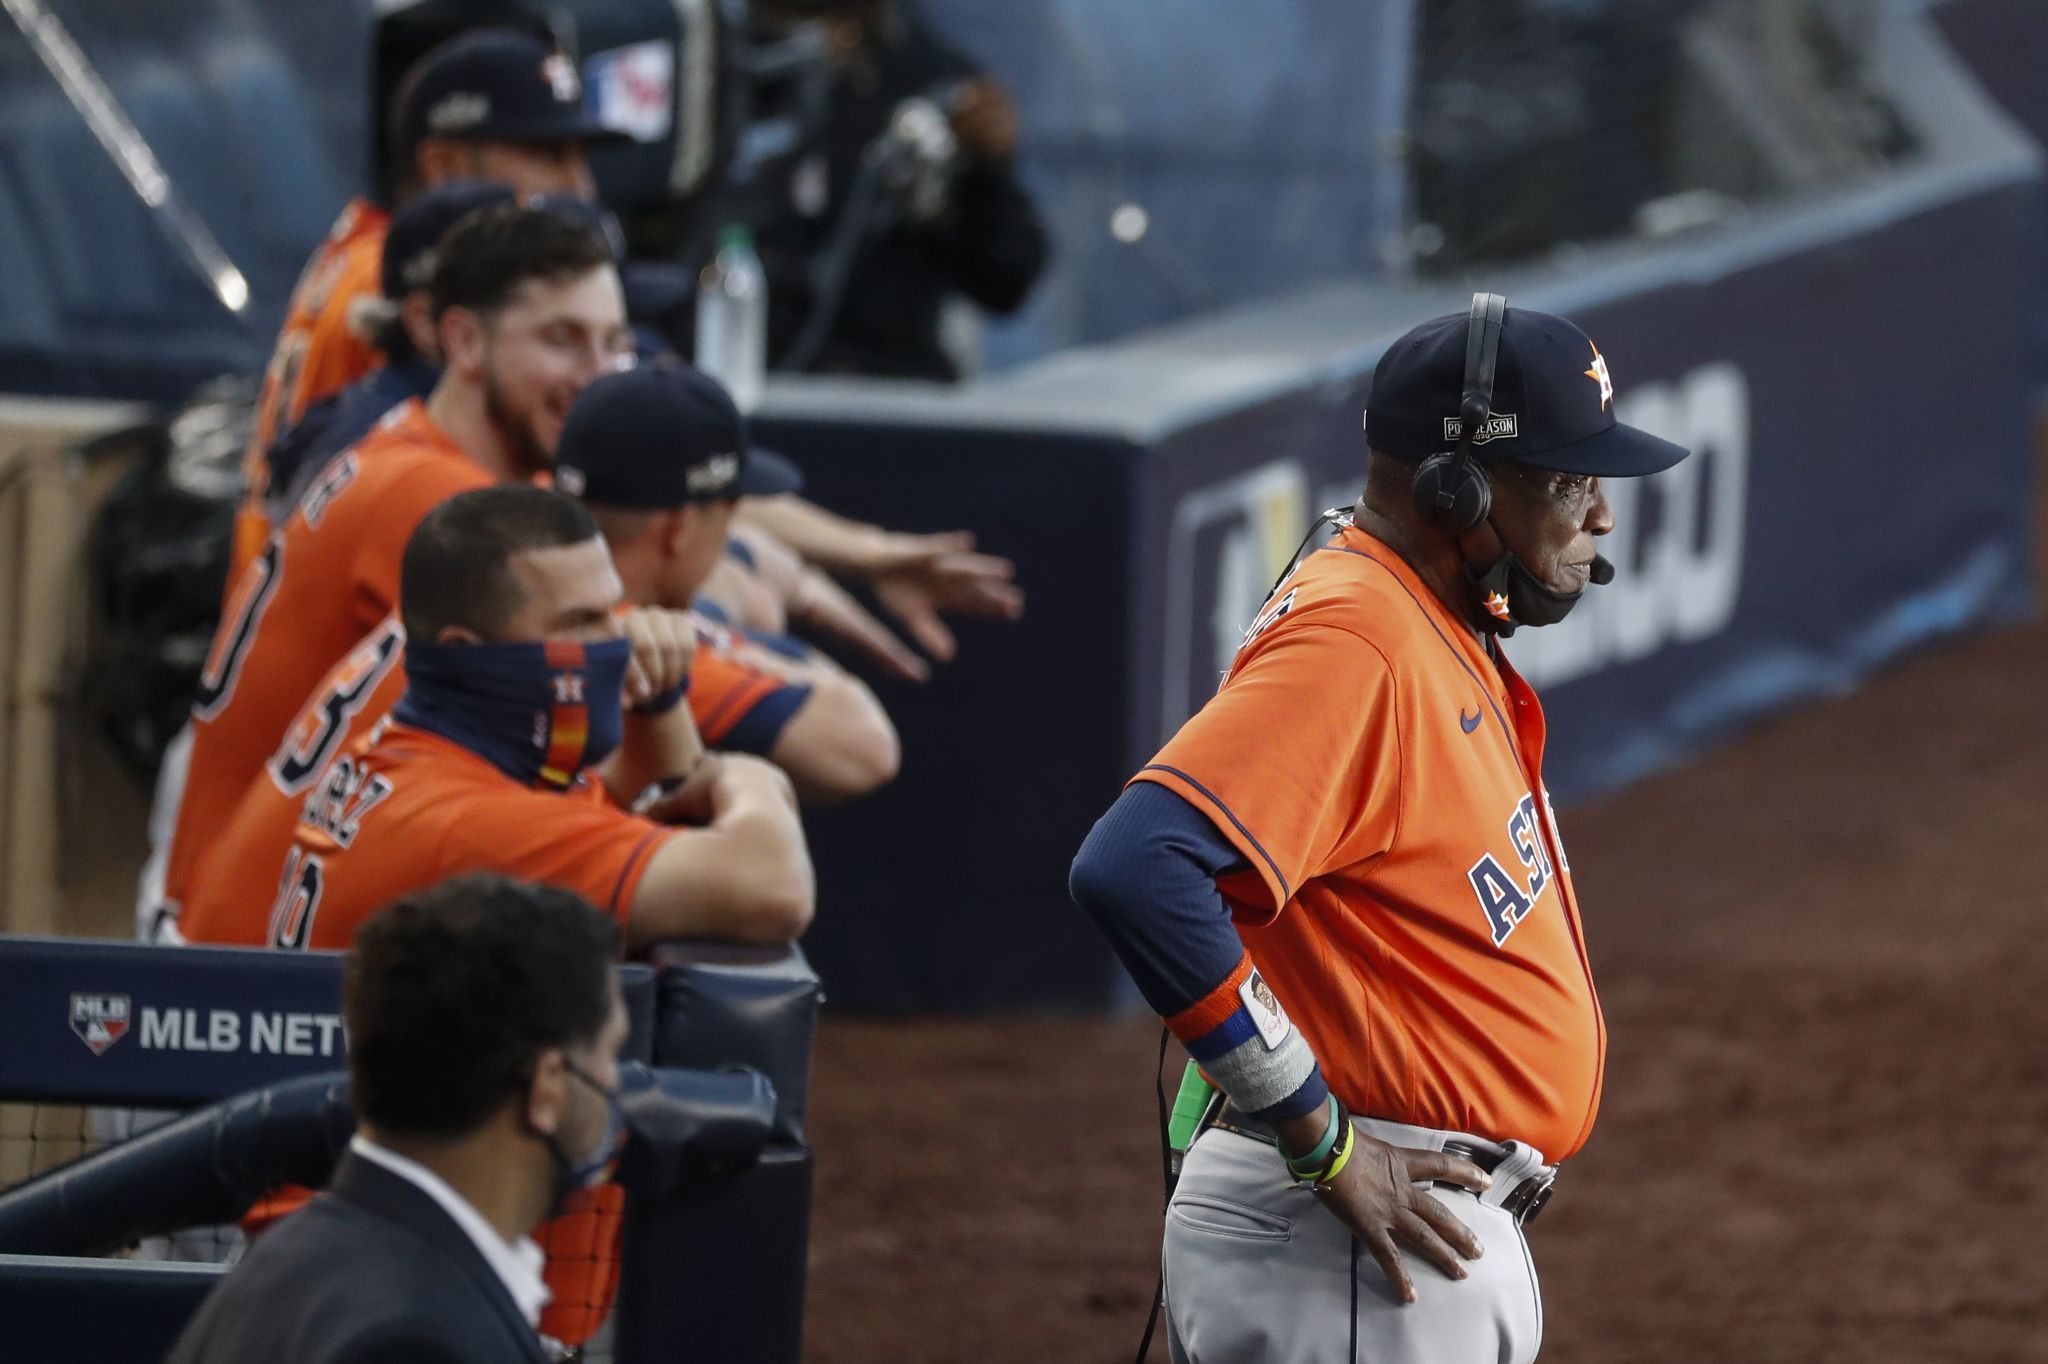 ALCS Game 7 Rays 4, Astros 2